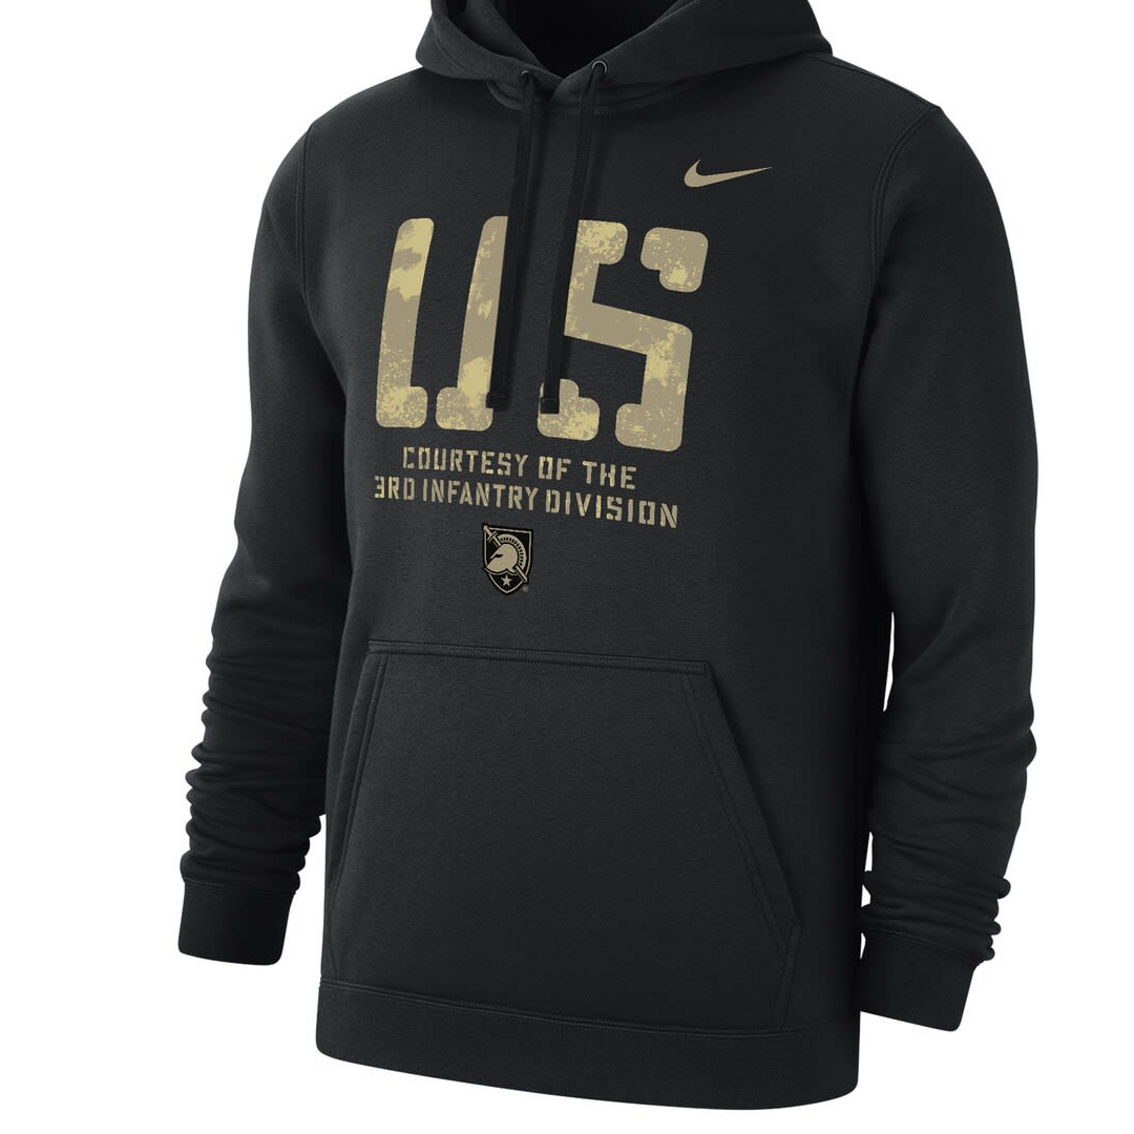 Men's Nike Black Army Black Knights Rivalry Courtesy Of Fleece Pullover Hoodie - Image 3 of 4